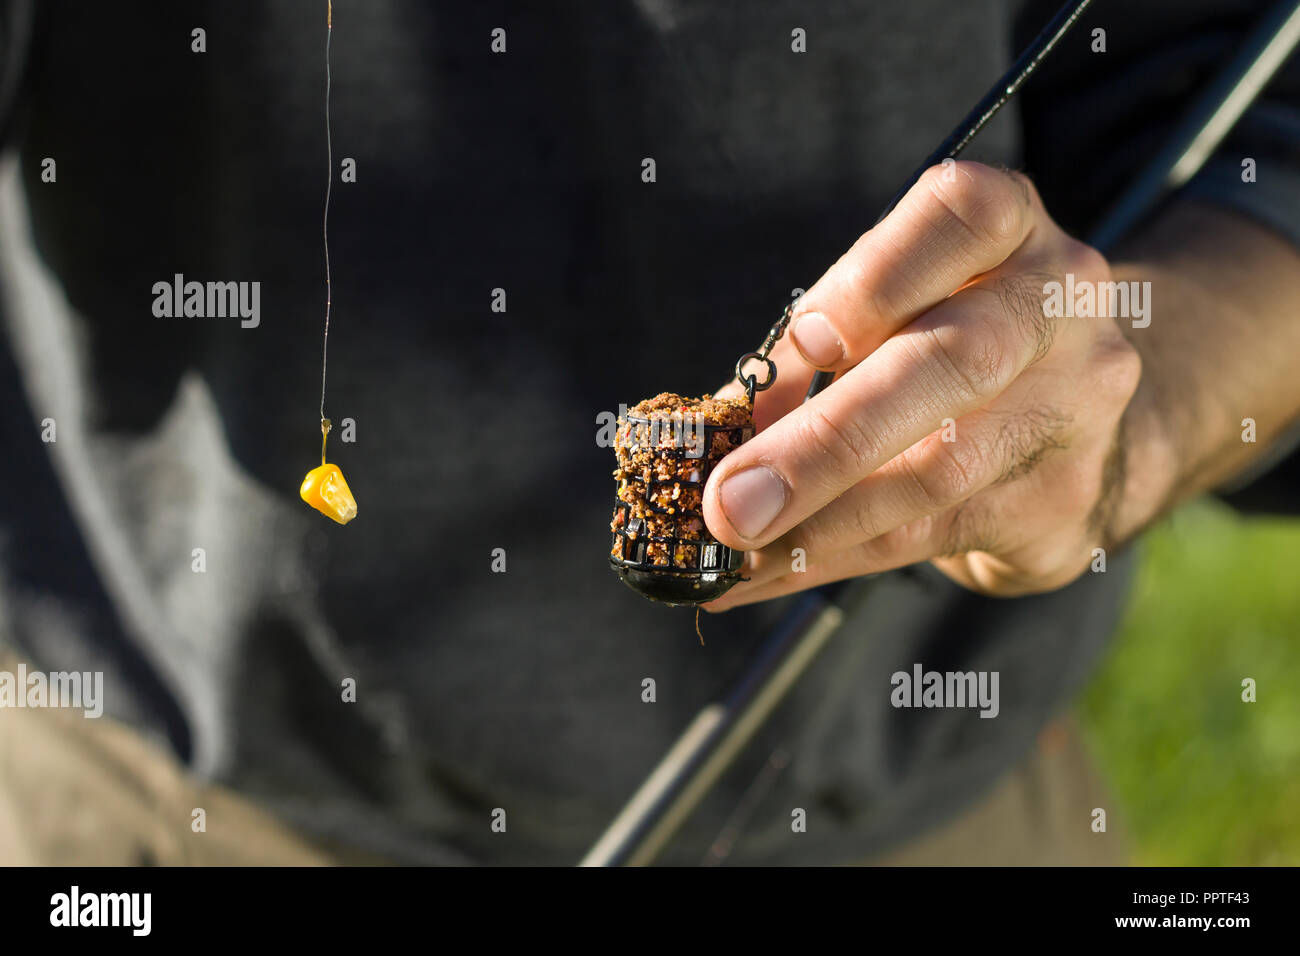 An angler's hand holds a basket of bait and angler’s leader with a hook with a grain of corn. Stock Photo